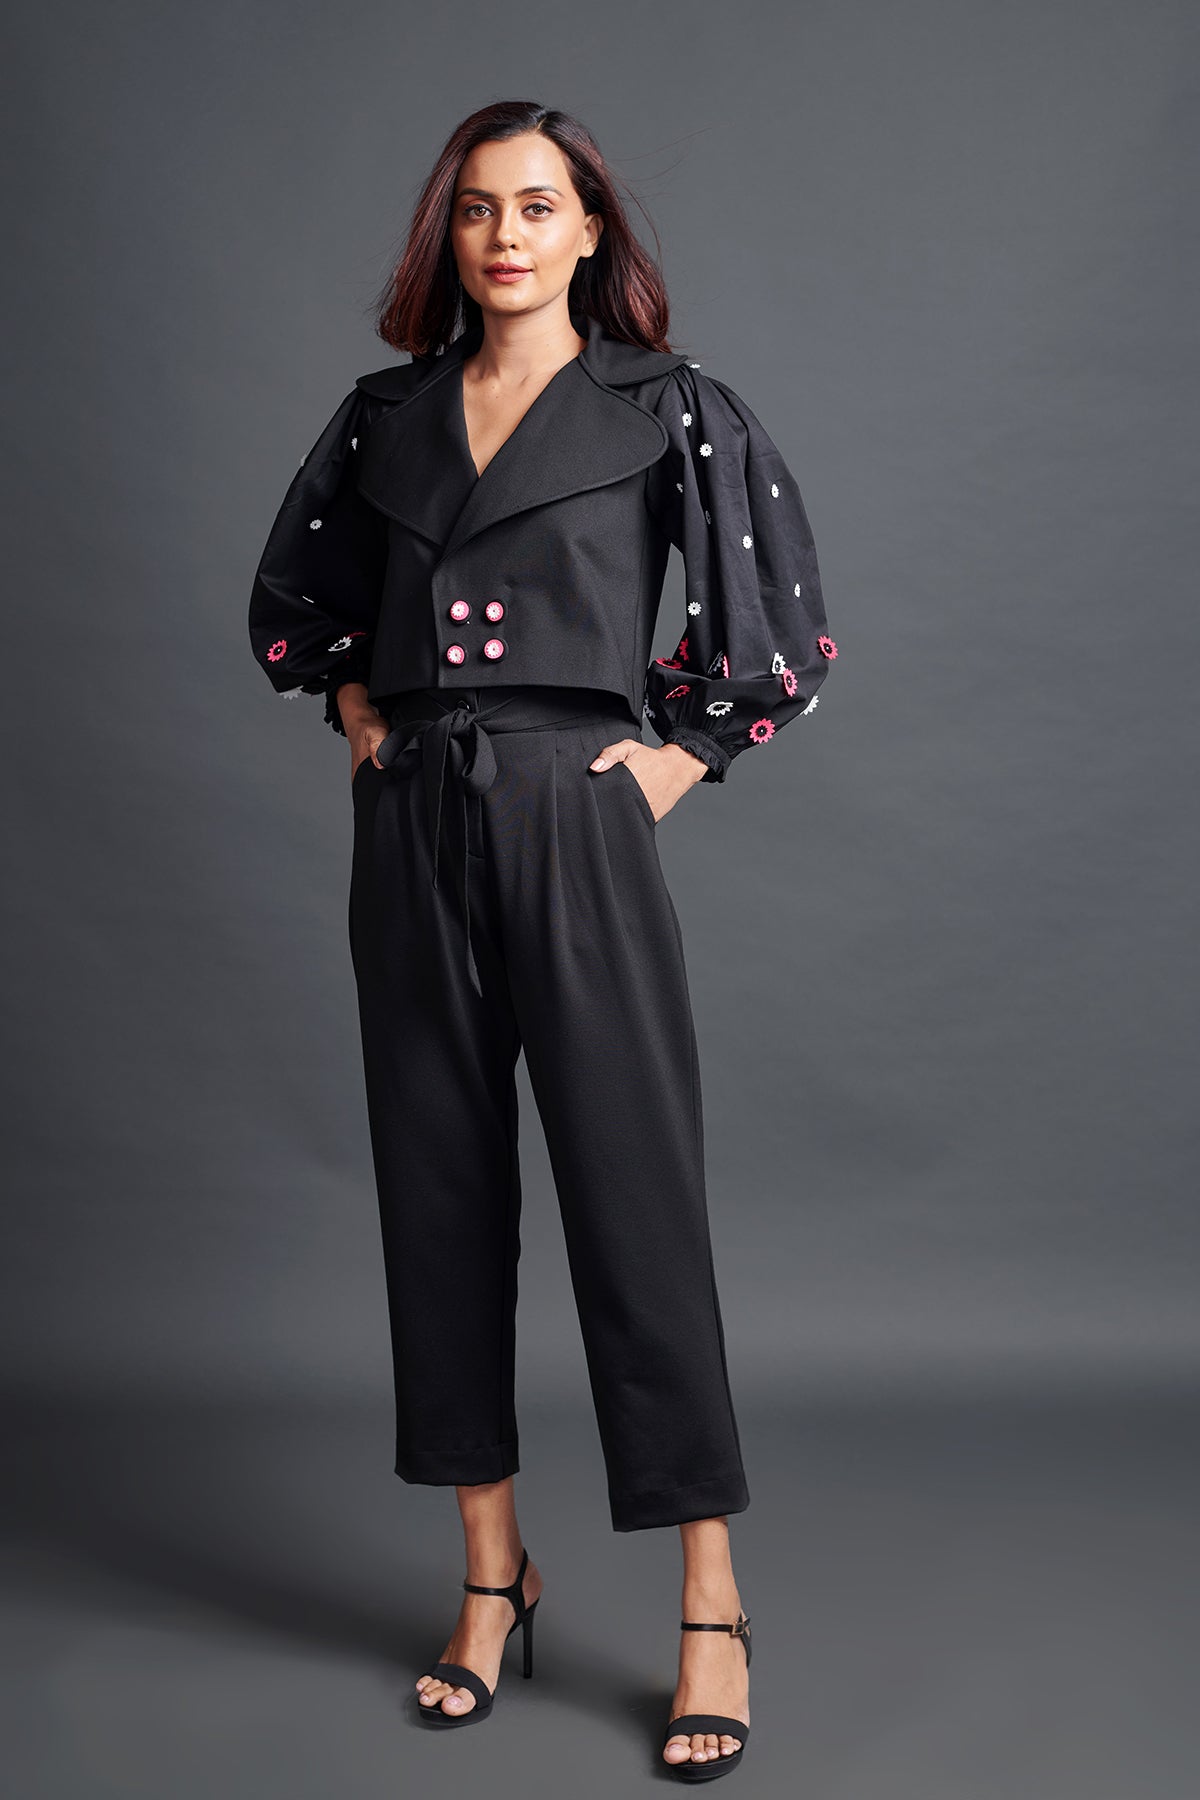 Image of BLACK CUT WORK DETAILED SLEEVED OVERLAP CROP JACKET AND PANTS. From savoirfashions.com